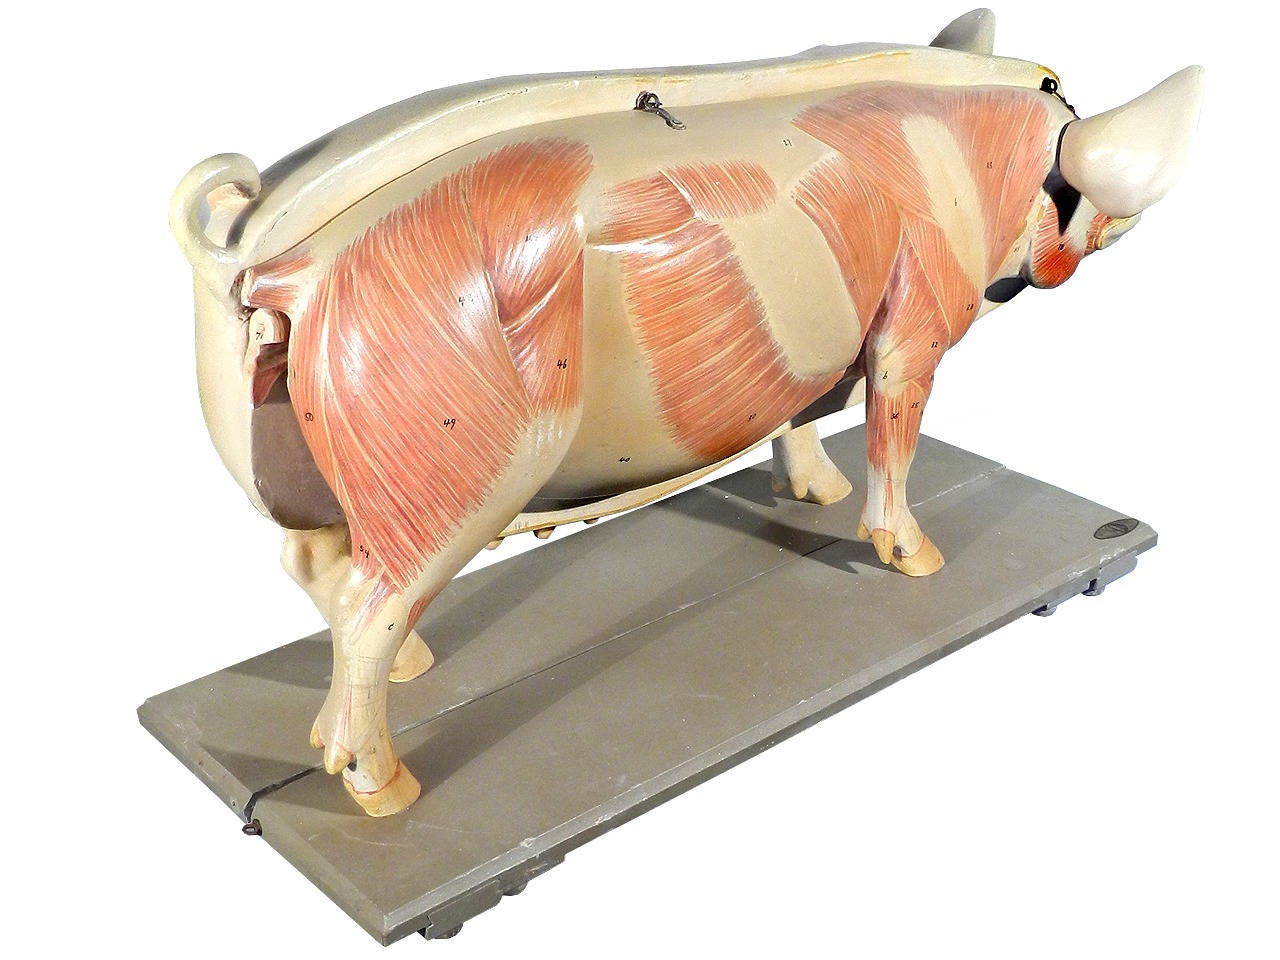 Life Size Anatomical Model of Pig, Germany 1